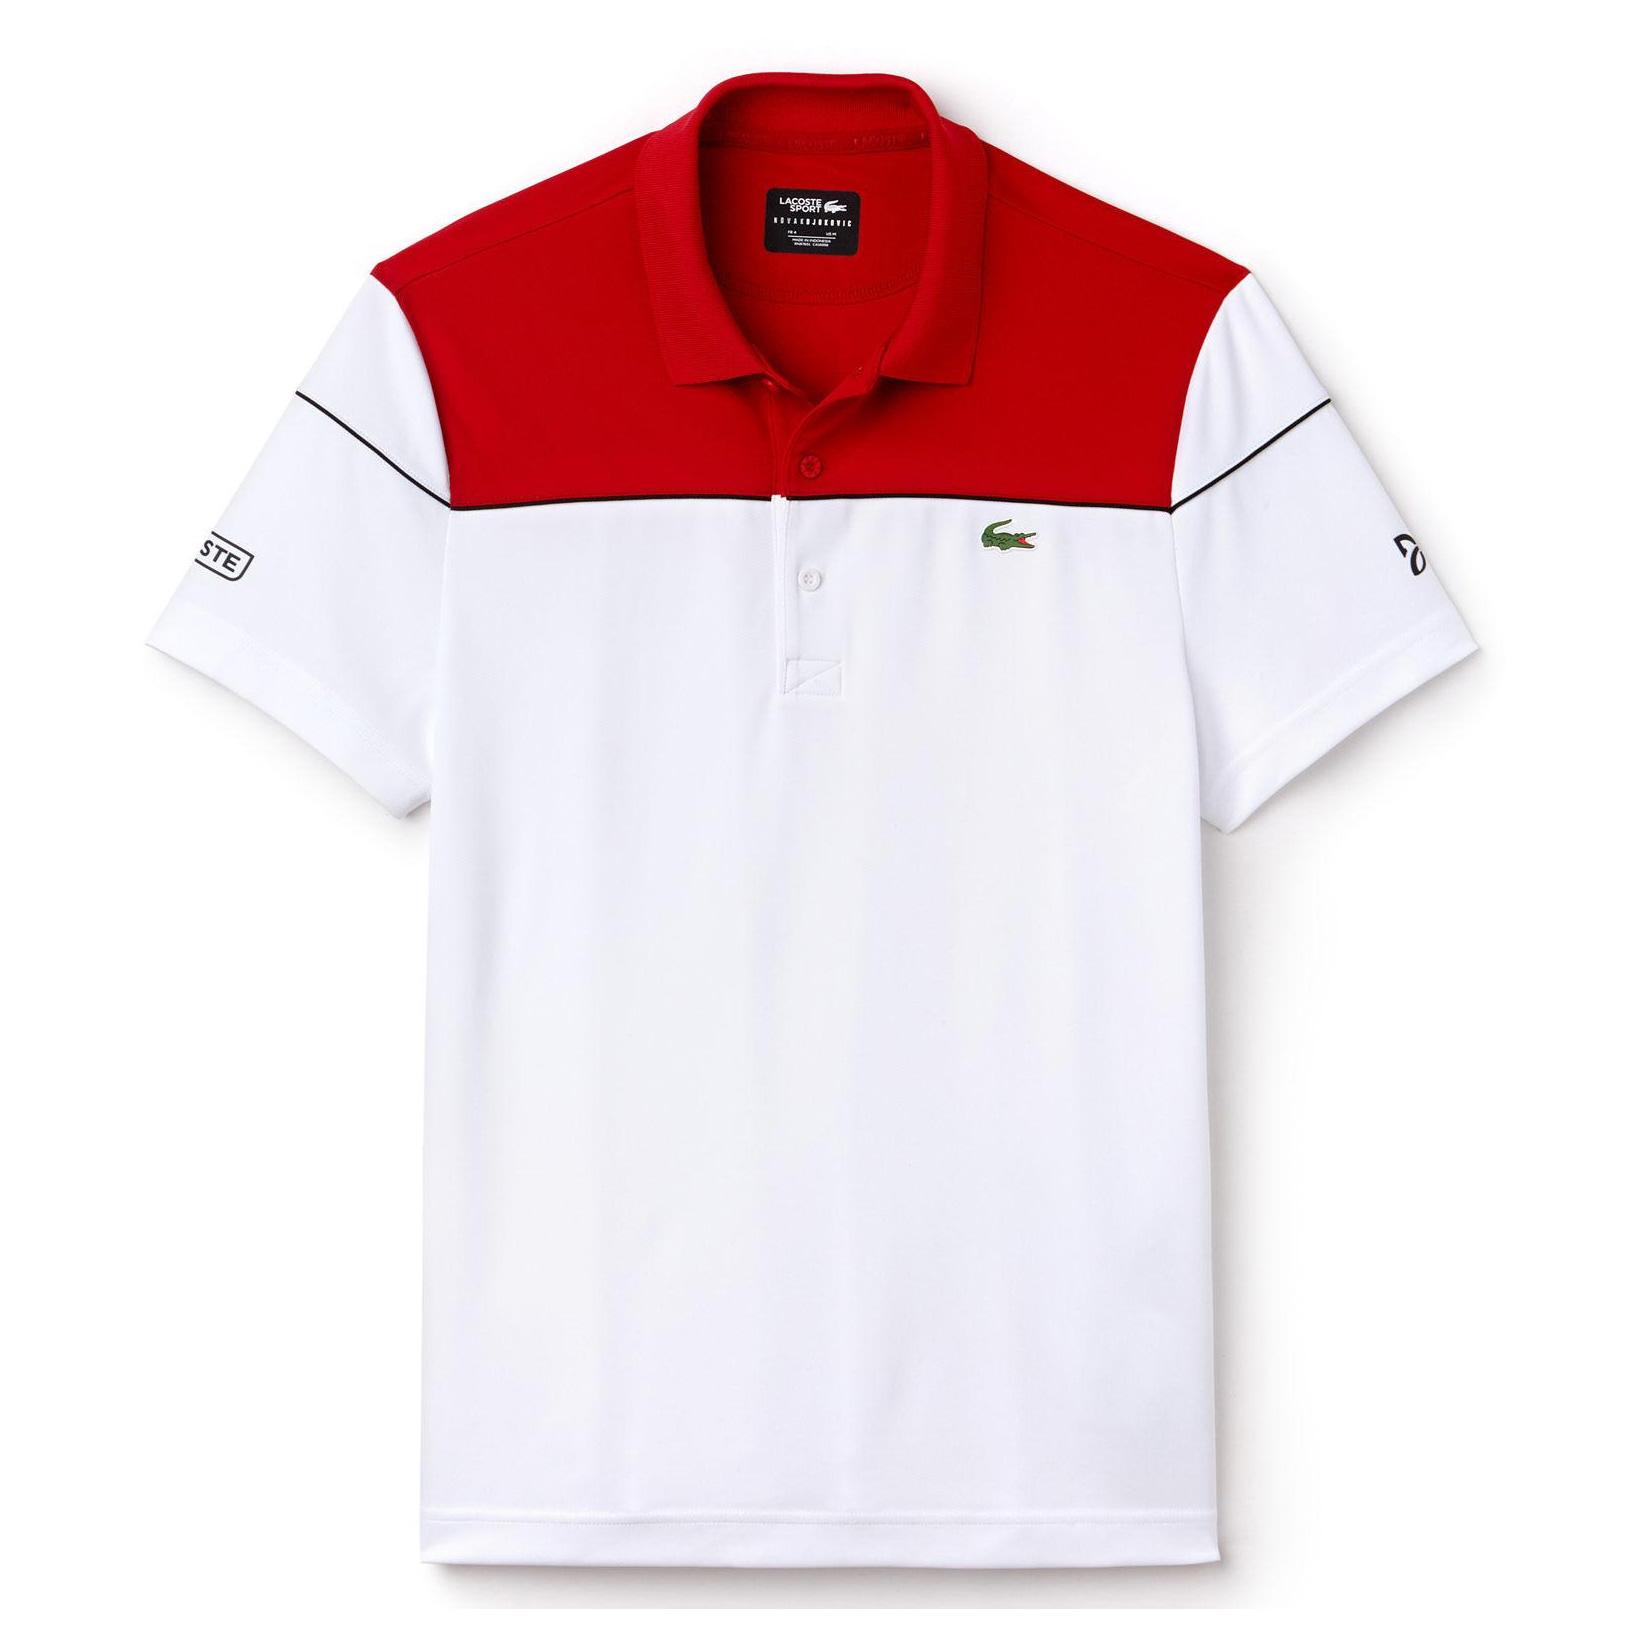 red and black lacoste shirt